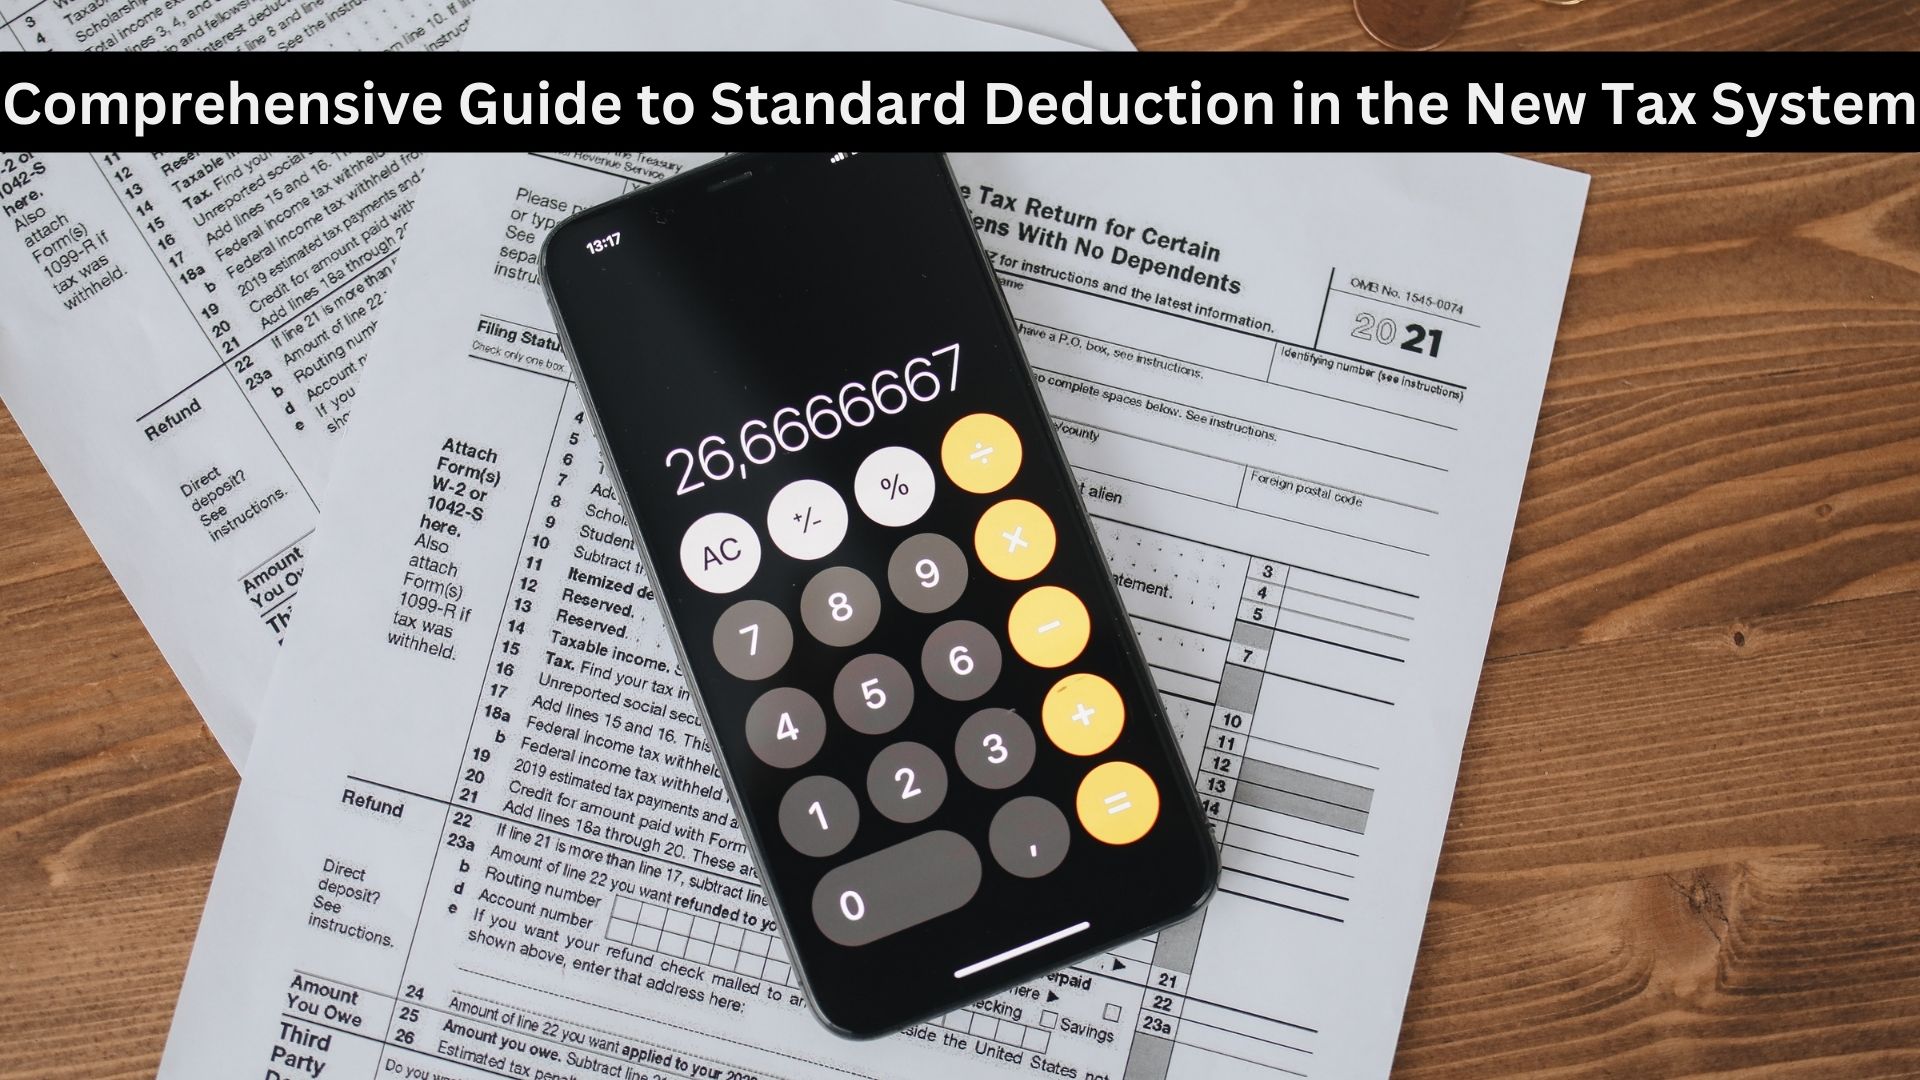 Comprehensive Guide to Standard Deduction in the New Tax System